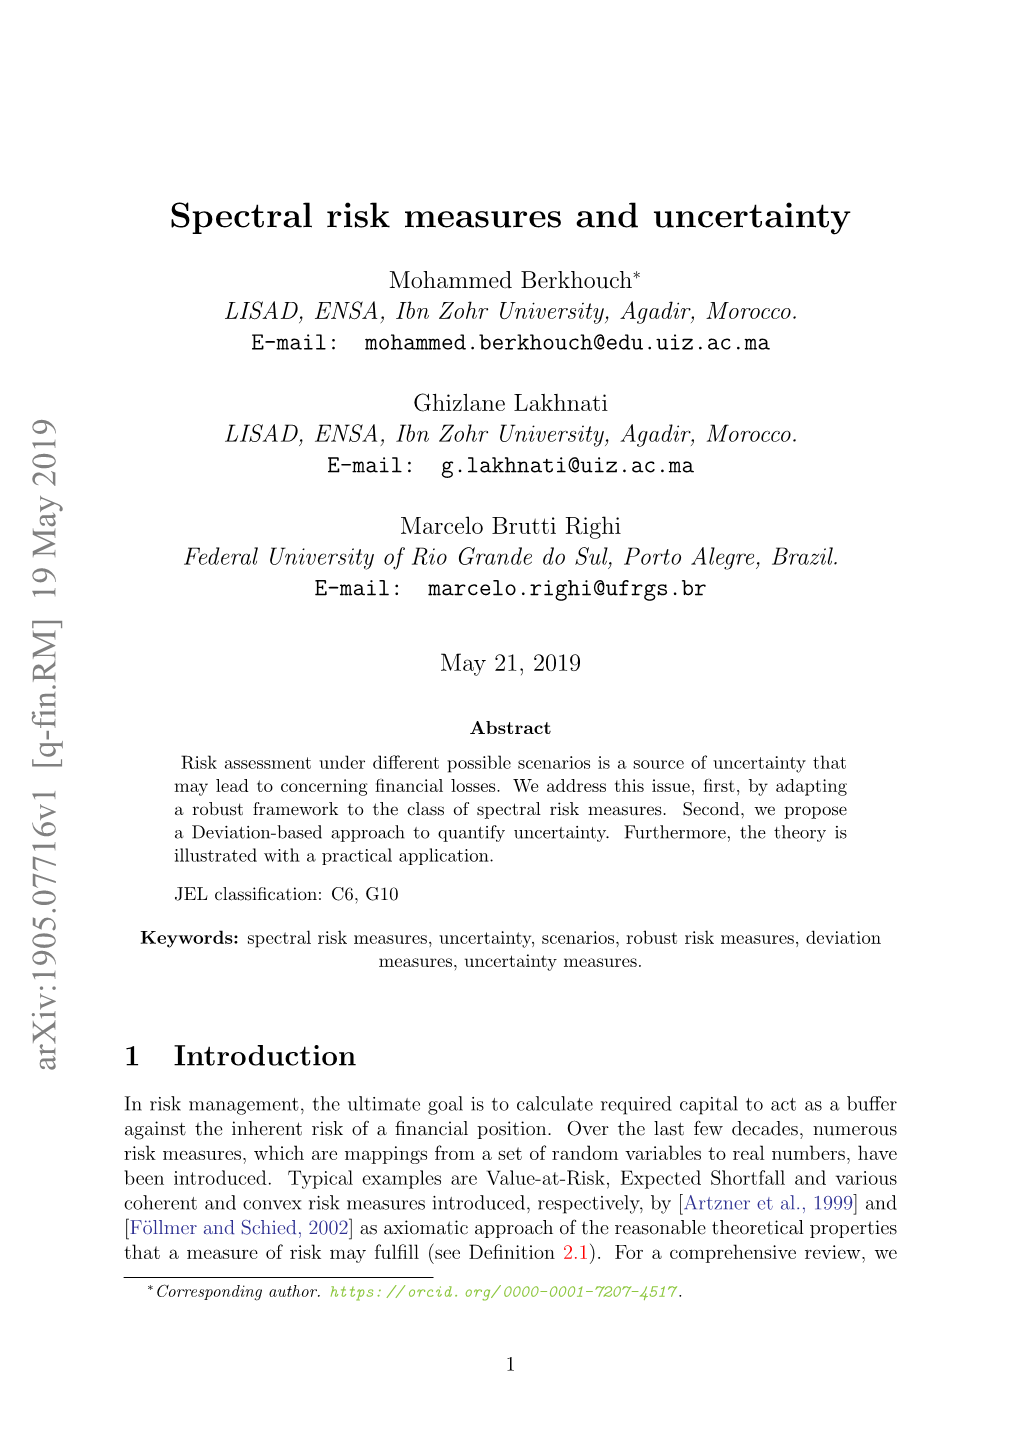 Spectral Risk Measures and Uncertainty Arxiv:1905.07716V1 [Q